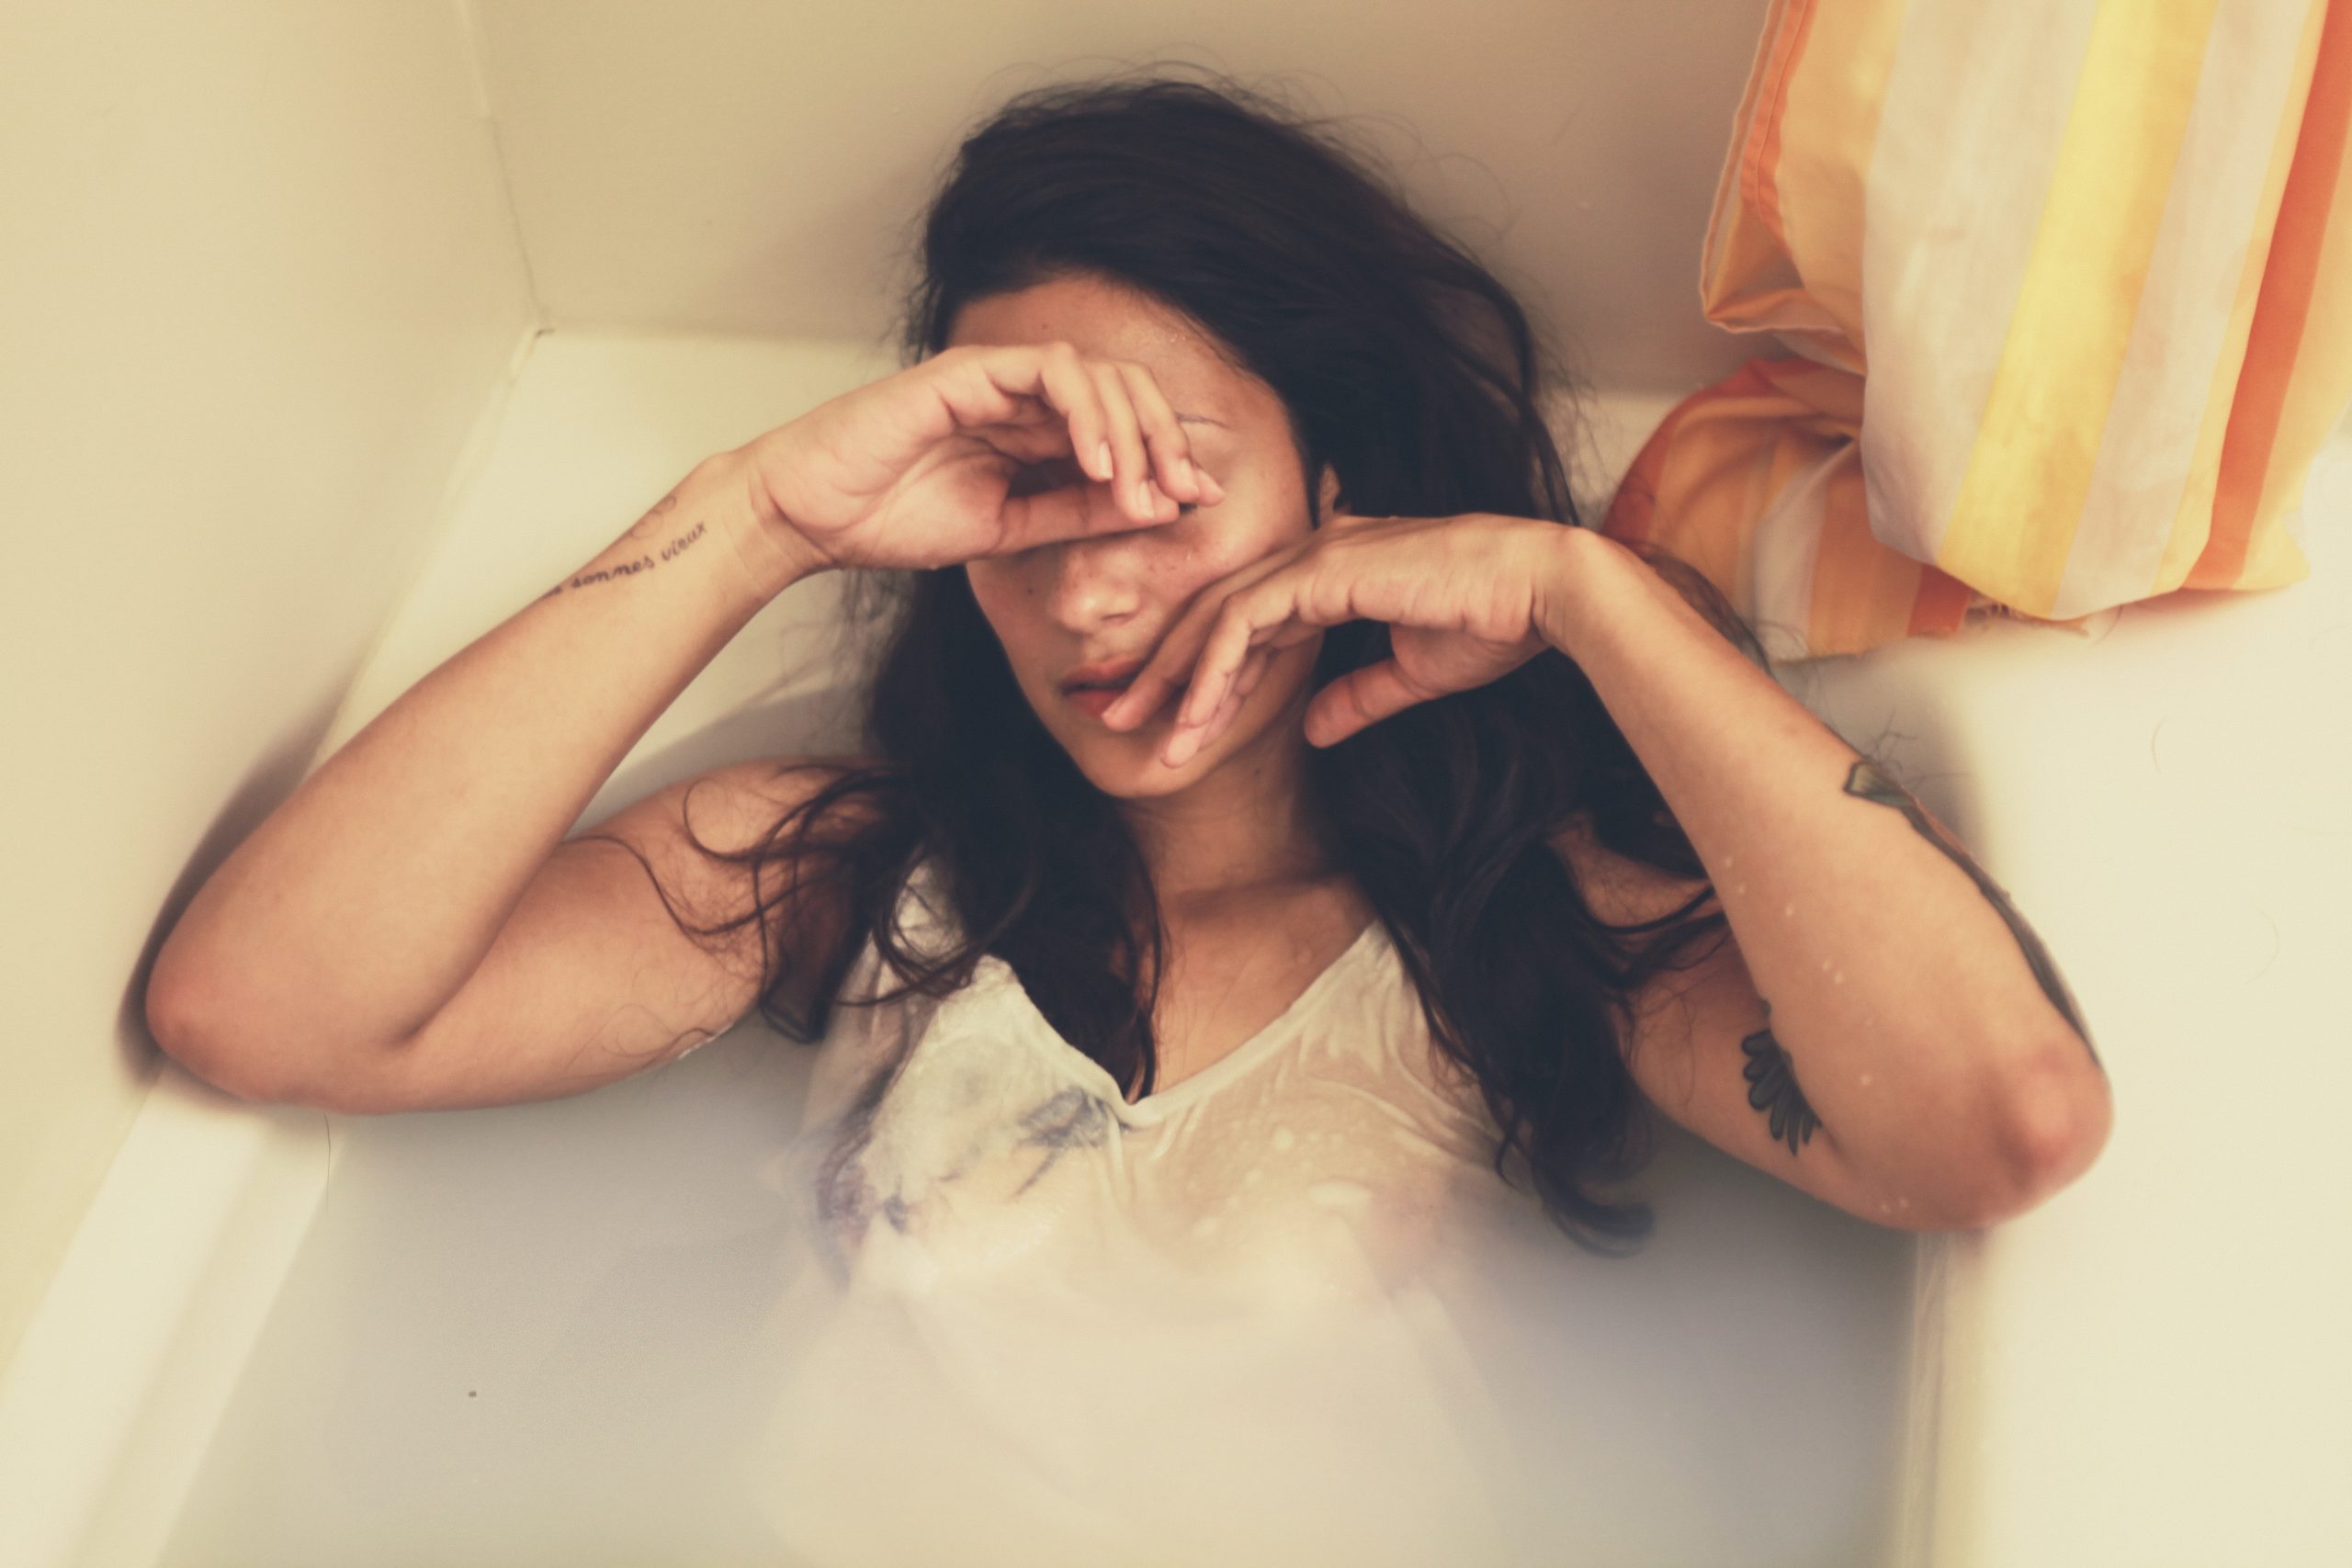 A woman laying in her bathtub with her shirt still on, hands covering her face.